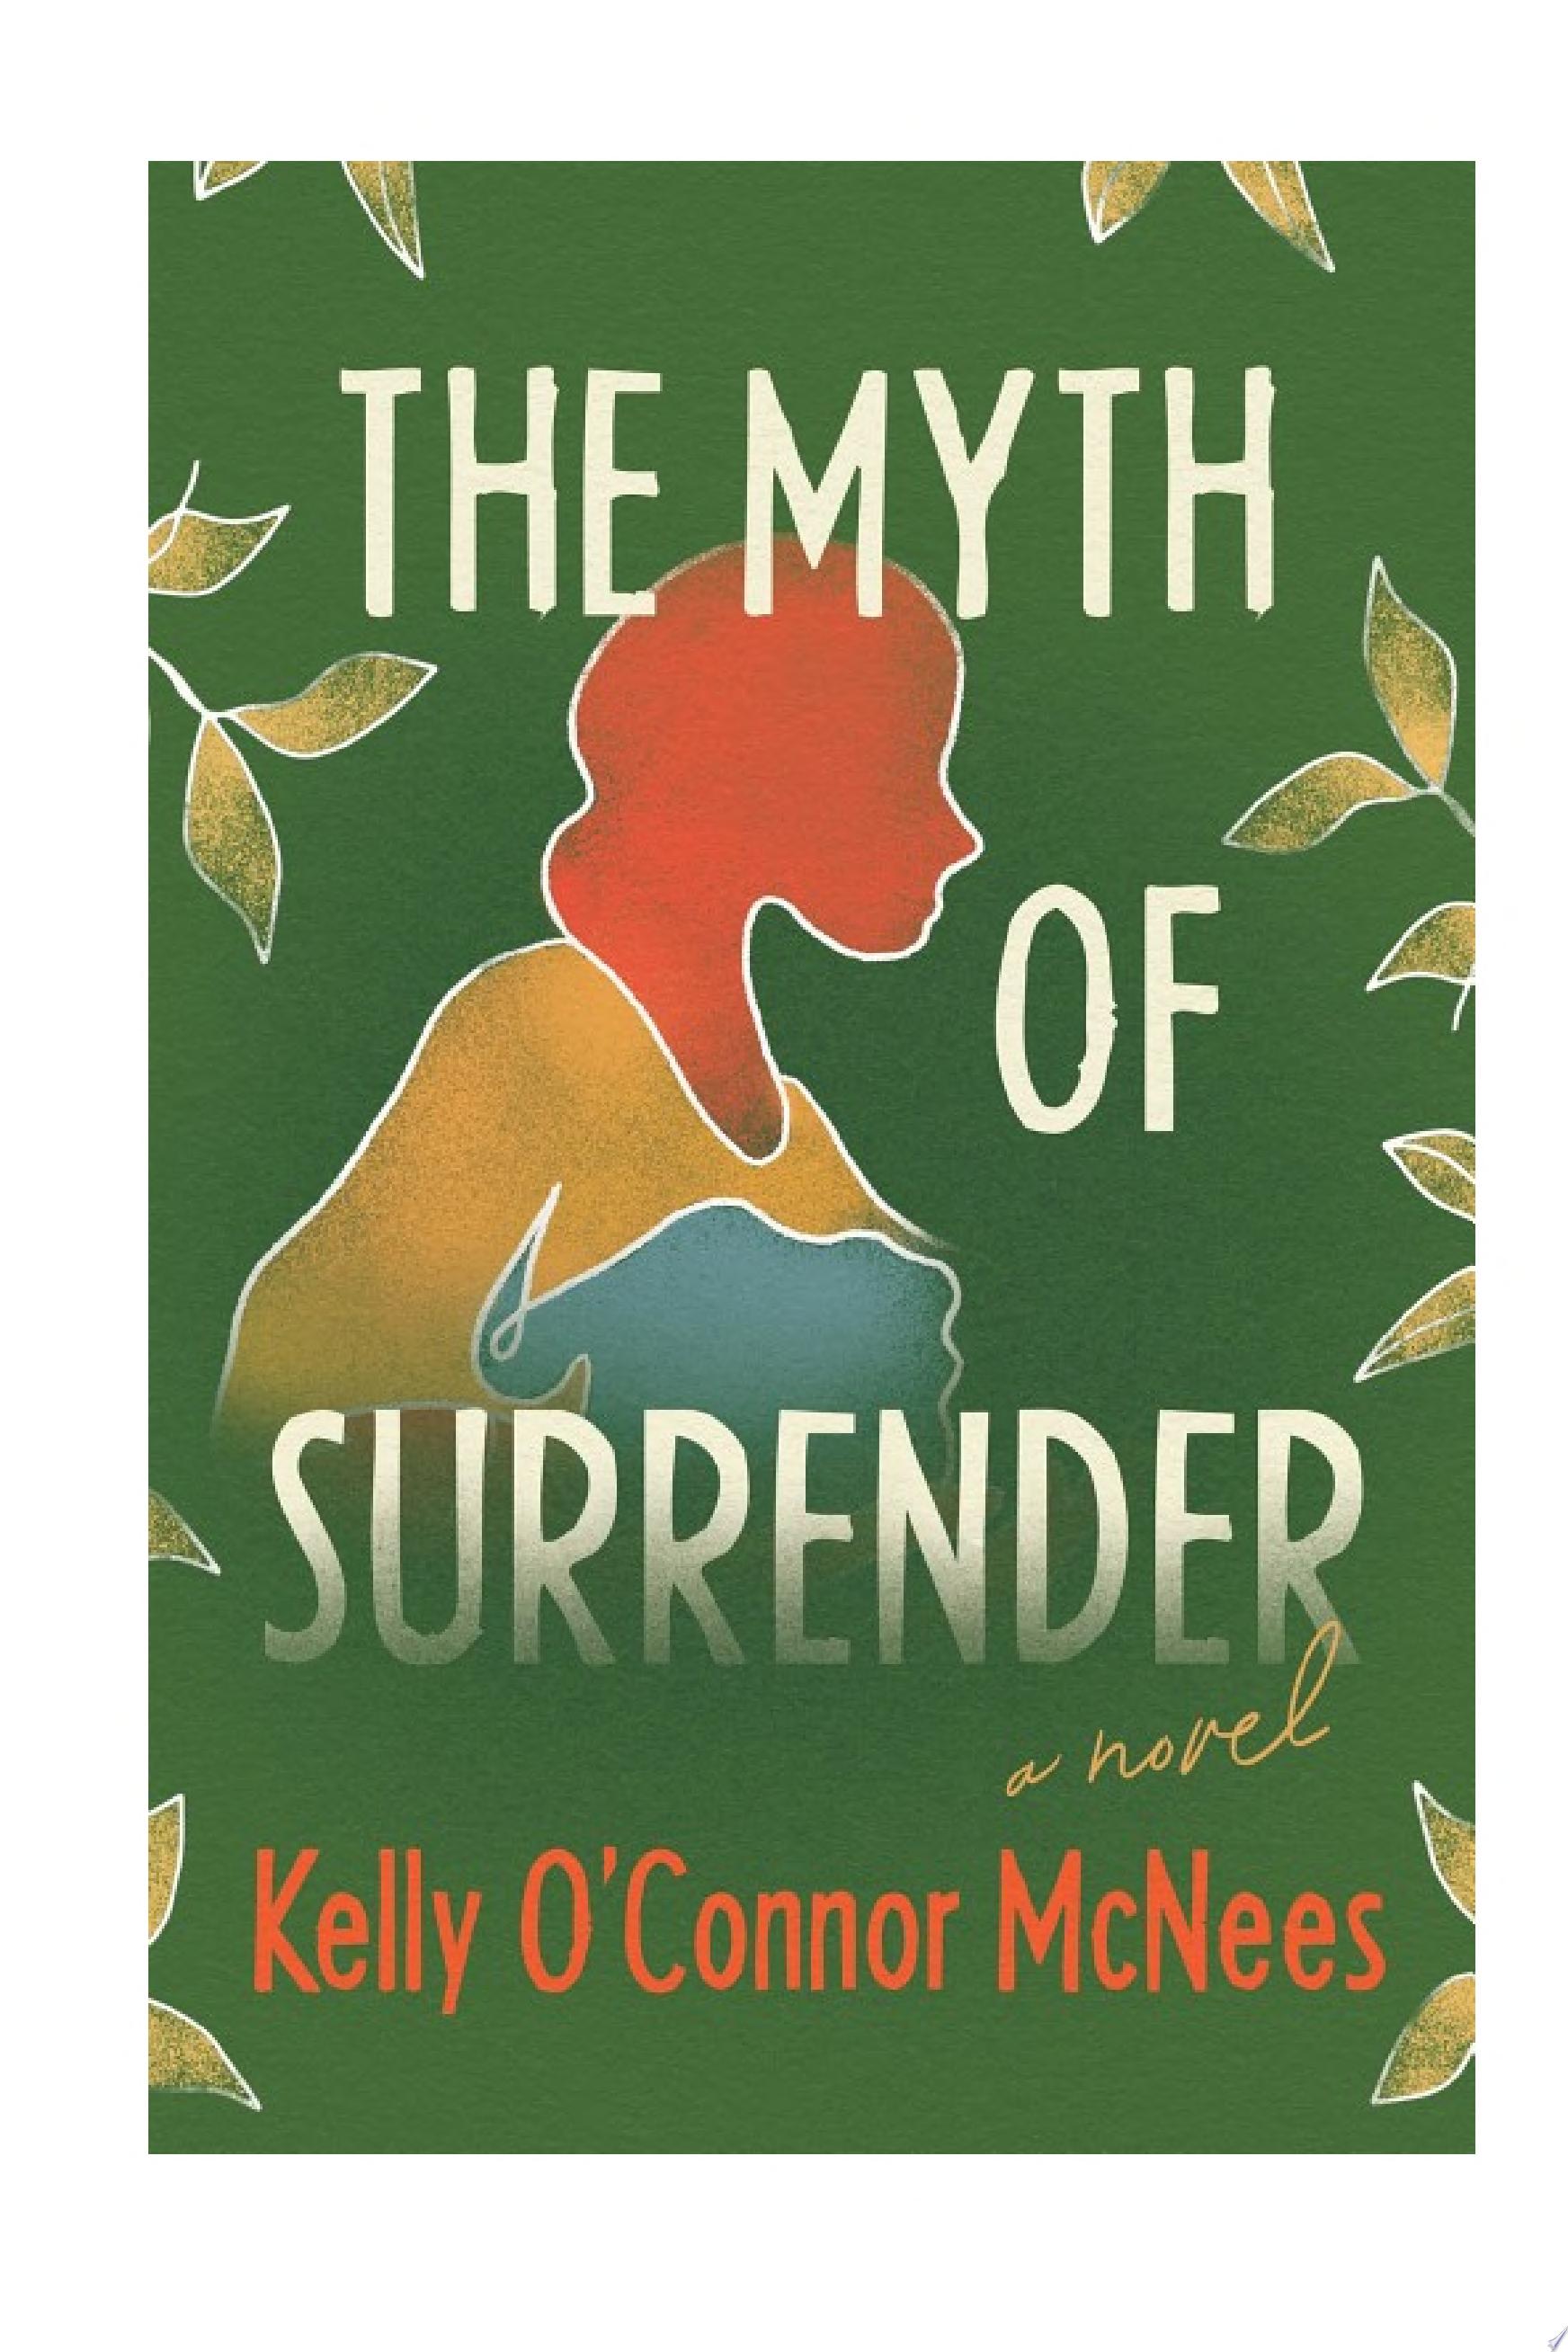 Image for "The Myth of Surrender"